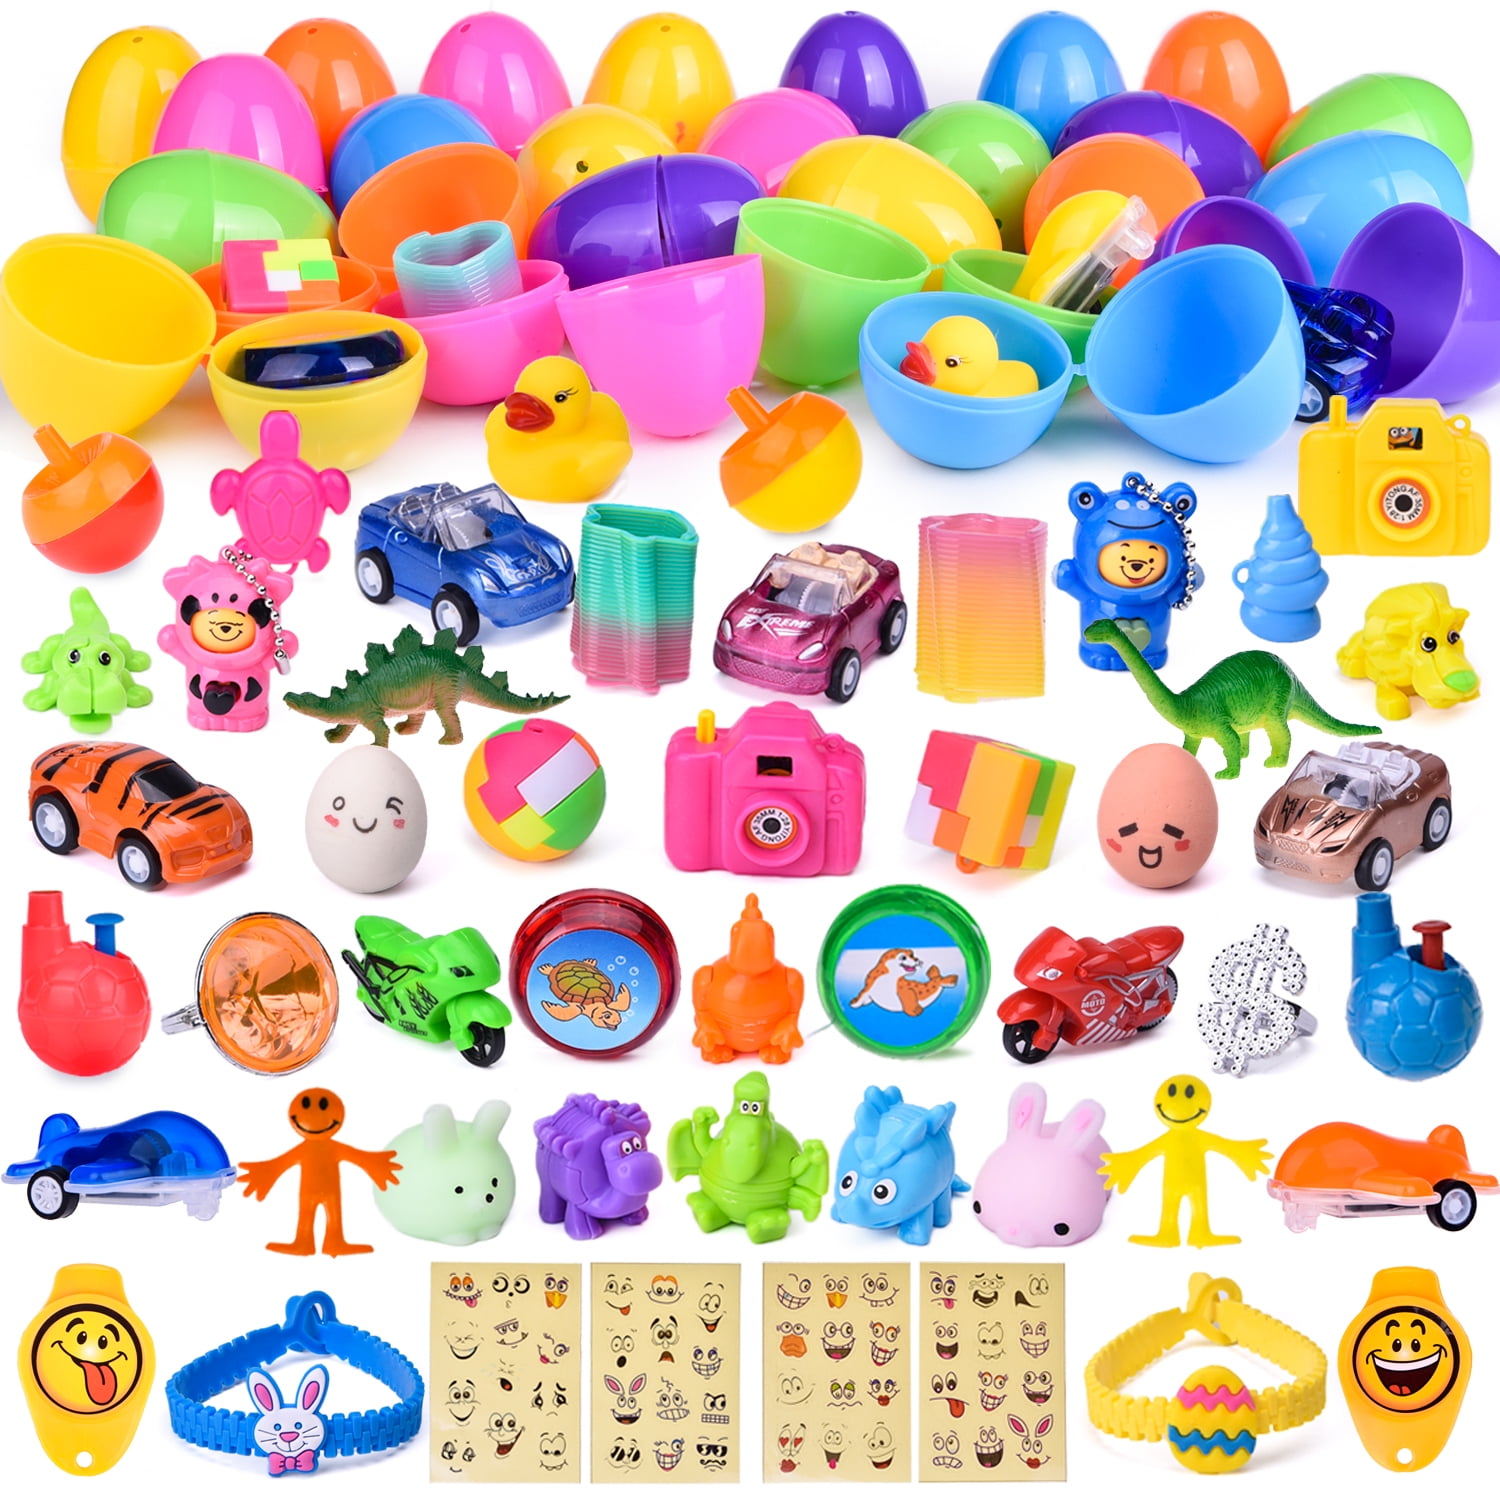 6 Bouncy Eggs Kids Party Bag Fillers Childrens Xmas Stocking Pocket Money Toy